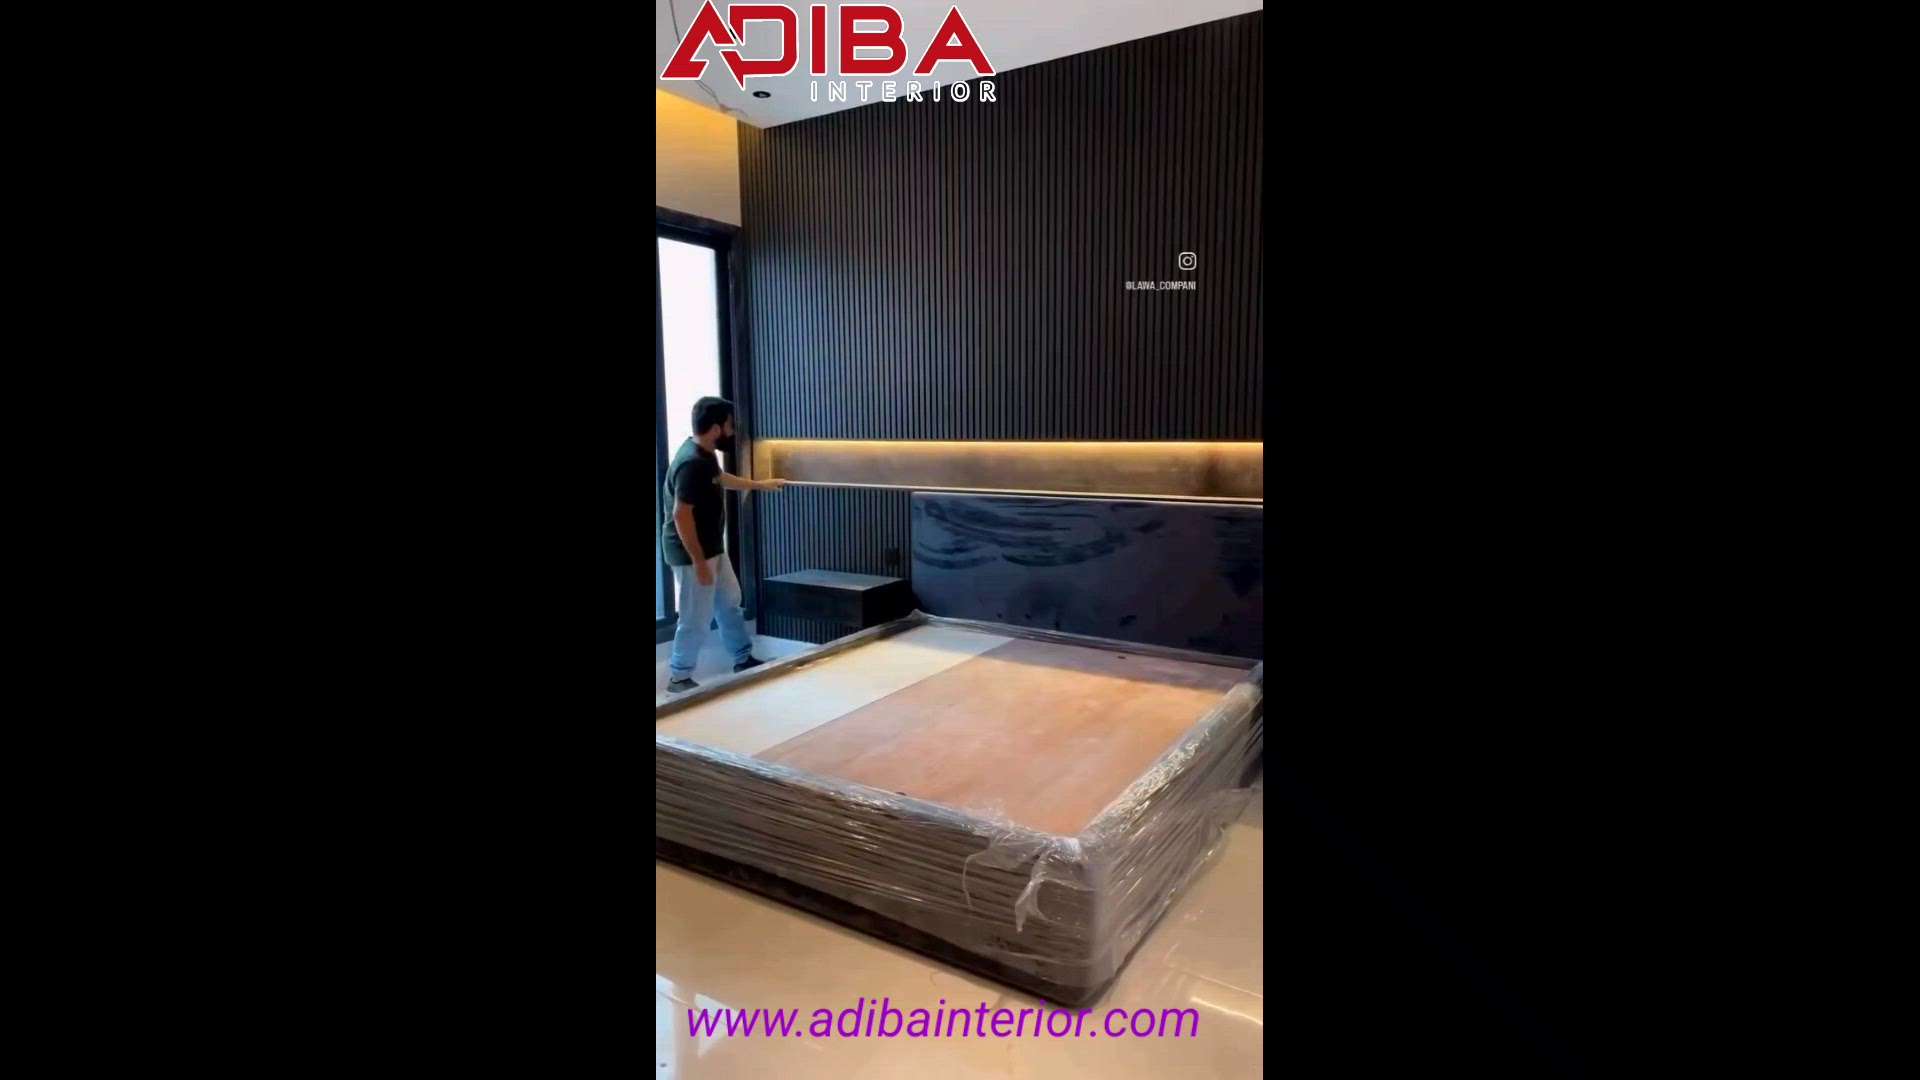 #adibainterior #Adibainterior #Adibainterior𝐖𝐞 𝐚𝐫𝐞 𝐭𝐨𝐩 𝐬𝐞𝐥𝐥𝐞𝐫 𝐢𝐧 𝐋𝐨𝐮𝐯𝐞𝐫'𝐬 𝐩𝐚𝐧𝐞𝐥 𝐢𝐧 𝐈𝐧𝐝𝐢𝐚.𝐏𝐮𝐫𝐜𝐡𝐚𝐬𝐞 𝐡𝐢𝐠𝐡 𝐪𝐮𝐚𝐥𝐢𝐭𝐲 𝐖𝐏𝐂 𝐋𝐨𝐮𝐯𝐞𝐫𝐬 𝐩𝐚𝐧𝐞𝐥 𝐭𝐨 𝐞𝐧𝐡𝐚𝐧𝐜𝐞 𝐭𝐡𝐞 𝐛𝐞𝐚𝐮𝐭𝐲 𝐨𝐟 𝐲𝐨𝐮𝐫 𝐥𝐢𝐯𝐢𝐧𝐠 𝐚𝐫𝐞𝐚𝐬.
.
.
.
Modern touch 🏠
Eco friendly 🌳
Easy to clean 🧽
Fast to install 🛠️
Water resistant 💦
Available in several textures
Visit us and check our collection of WPC Wall Panels

Contact us for more information and we will be more than glad to assist you 👇🏻

𝐅𝐨𝐫 𝐦𝐨𝐫𝐞 𝐢𝐧𝐟𝐨, 𝐩𝐥𝐞𝐚𝐬𝐞 𝐜𝐚𝐥𝐥/ 𝐭𝐞𝐱𝐭 𝐮𝐬; 𝐎𝐫𝐝𝐞𝐫 𝐧𝐨𝐰!!!

𝘈𝘭𝘭 𝘪𝘯𝘵𝘦𝘳𝘪𝘰𝘳 𝘚𝘰𝘭𝘶𝘵𝘪𝘰𝘯𝘴 & 𝘏𝘰𝘮𝘦 𝘋𝘦𝘤ore
📦 Product/Service: PVC Panels, Wallpapers, Artificial Grass, UV sheets and Many More.
📲 Call : 9319882447 interioradiba@gmail.com
🏬 Walk In niwari  𝐫𝐨𝐚𝐝, 𝐌𝐨𝐝𝐢𝐧𝐚𝐠𝐚𝐫, 𝐔𝐭𝐭𝐚𝐫 𝐏𝐫𝐚𝐝𝐞𝐬𝐡 𝟐𝟎𝟏𝟐𝟎4

#ceilings #architecture #adibainterior #ceilingdesign #interiordesign #interior #interiordeco